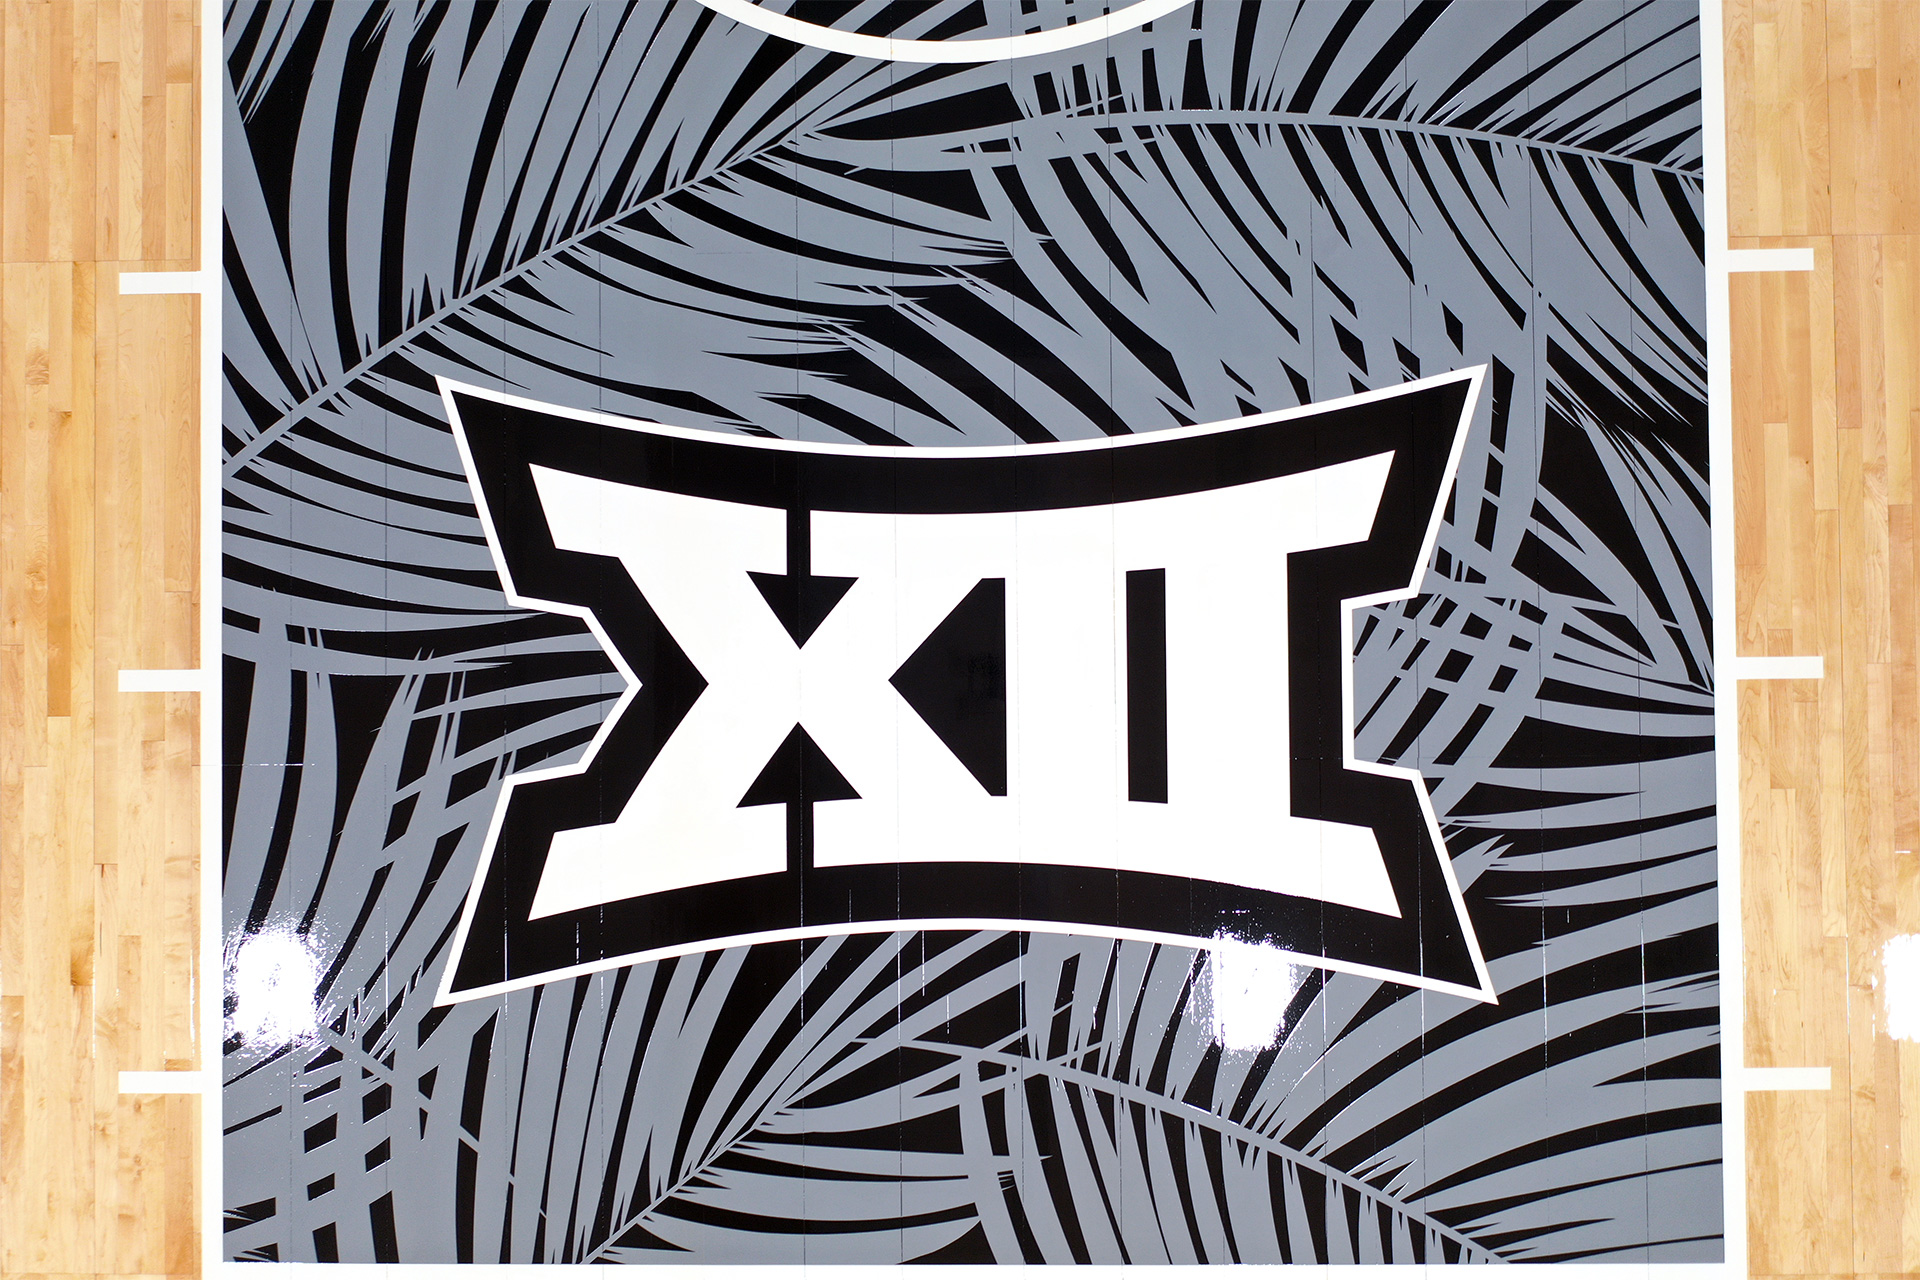 Painted lanes featuring palm-leaf pattern. Big 12 conference.